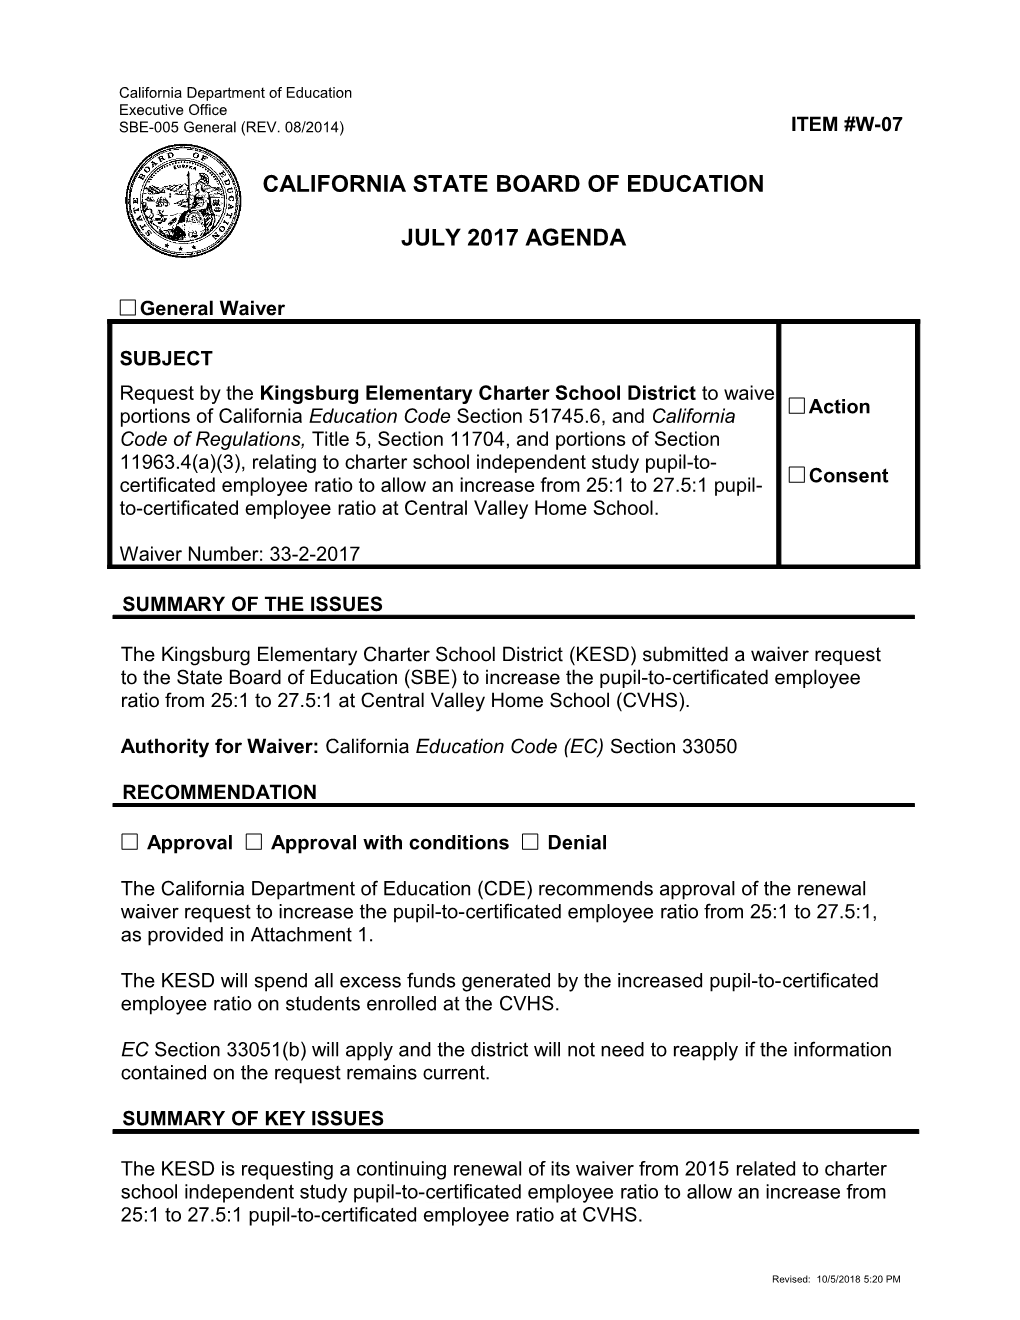 July 2017 Waiver Item W-07 - Meeting Agendas (CA State Board of Education)